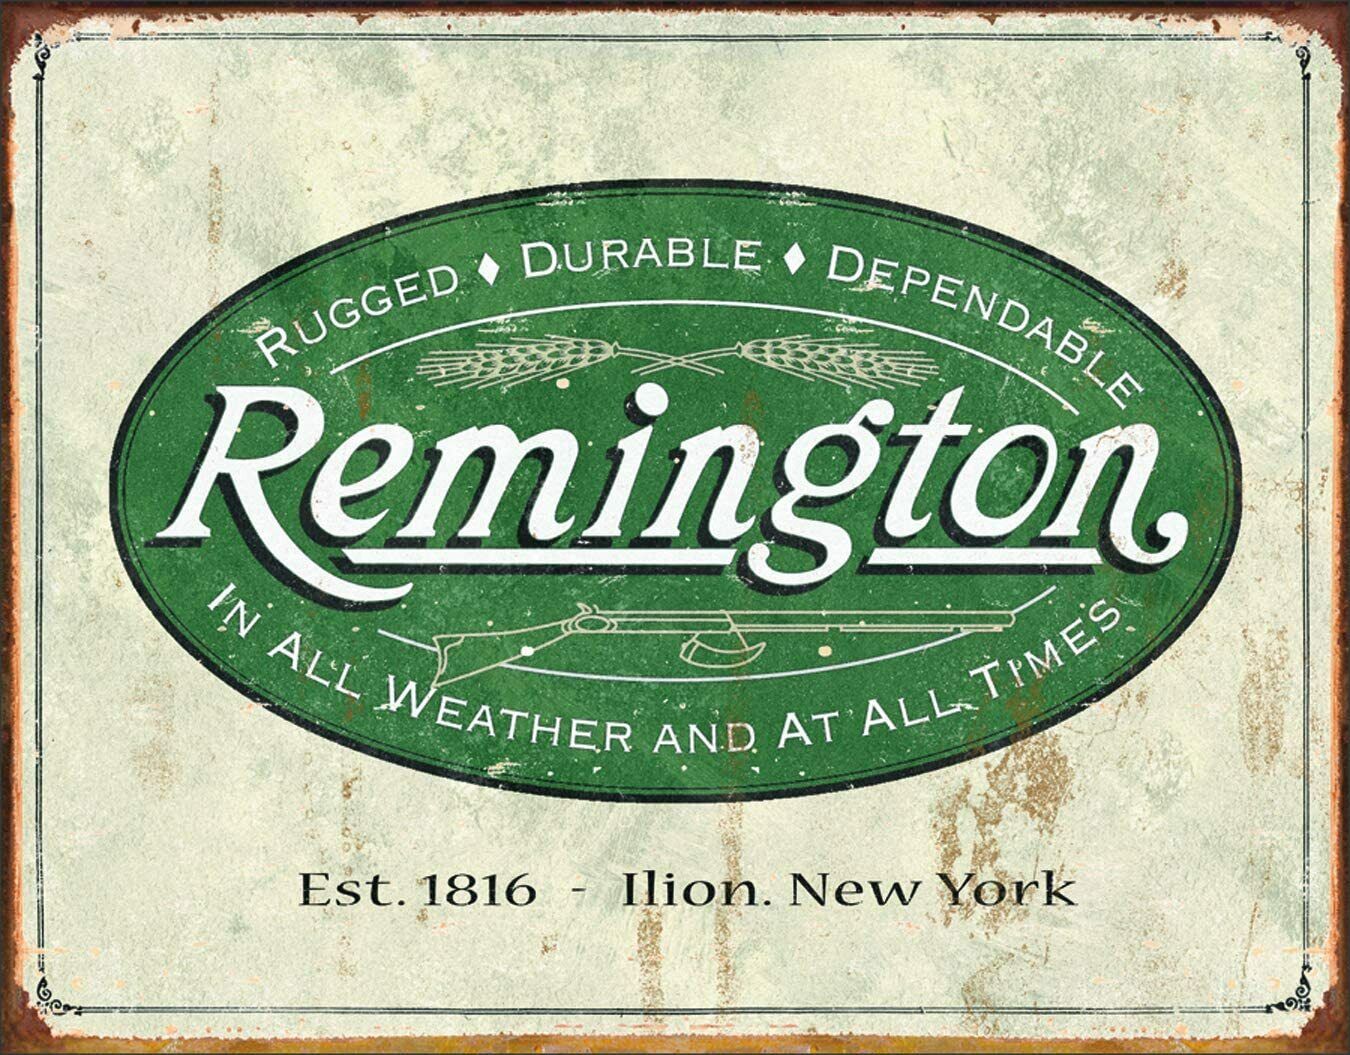 REMINGTON TIN SIGN RUGGED DEPENDABLE DURABLE ALL WEATHER ALL TIMES NEW YORK